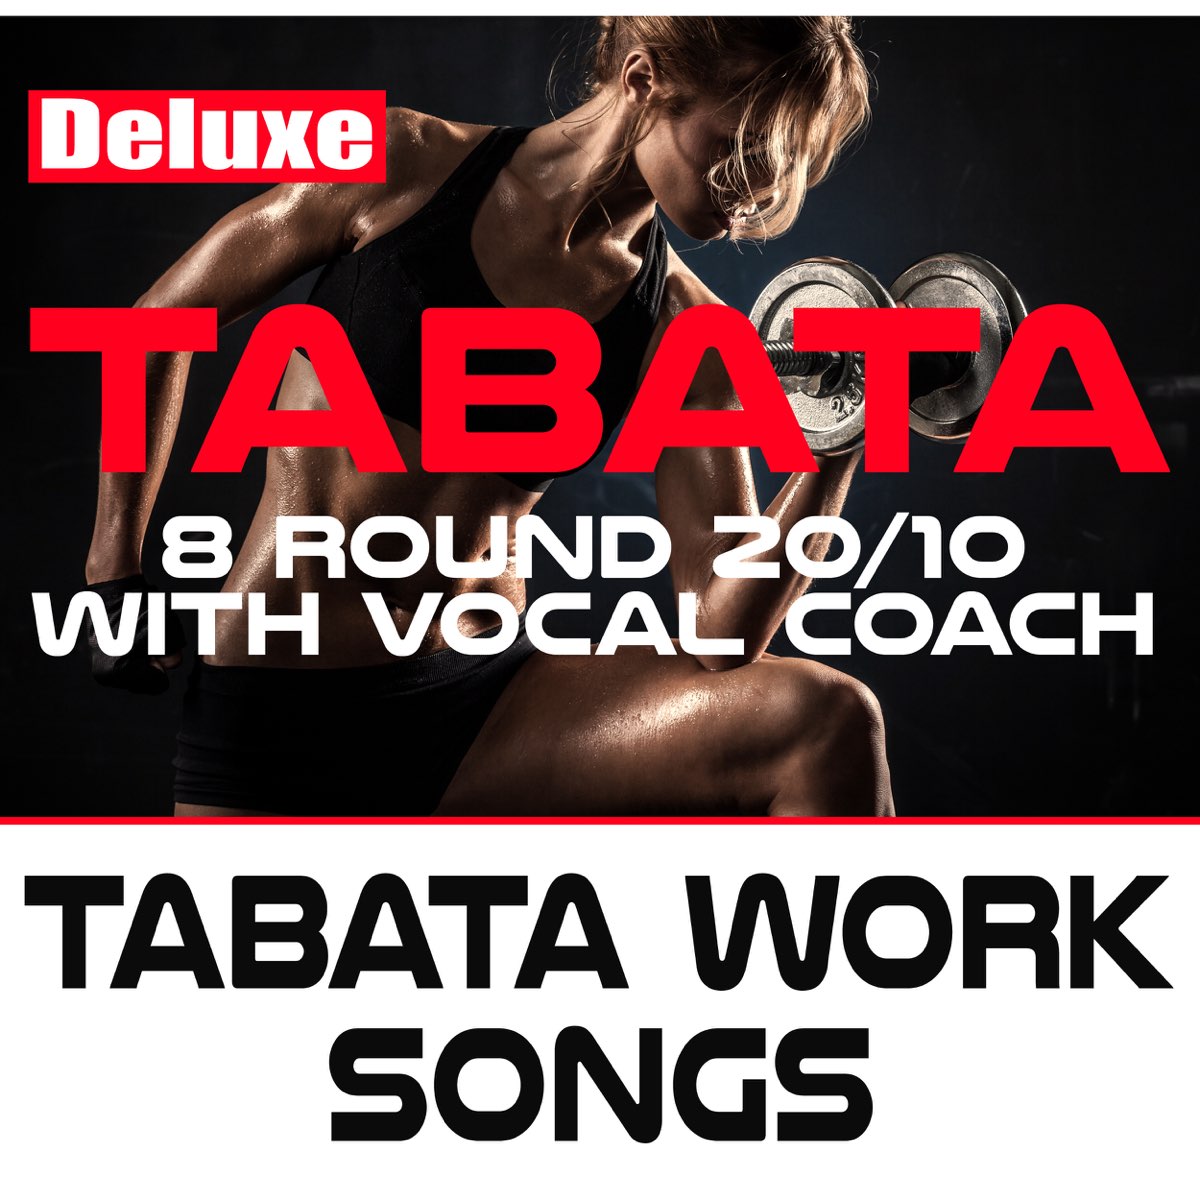 Tabata Workout Songs (Deluxe) [8 Round 20/10 With Vocal Coach] - Album di  Tabata Workout Song - Apple Music